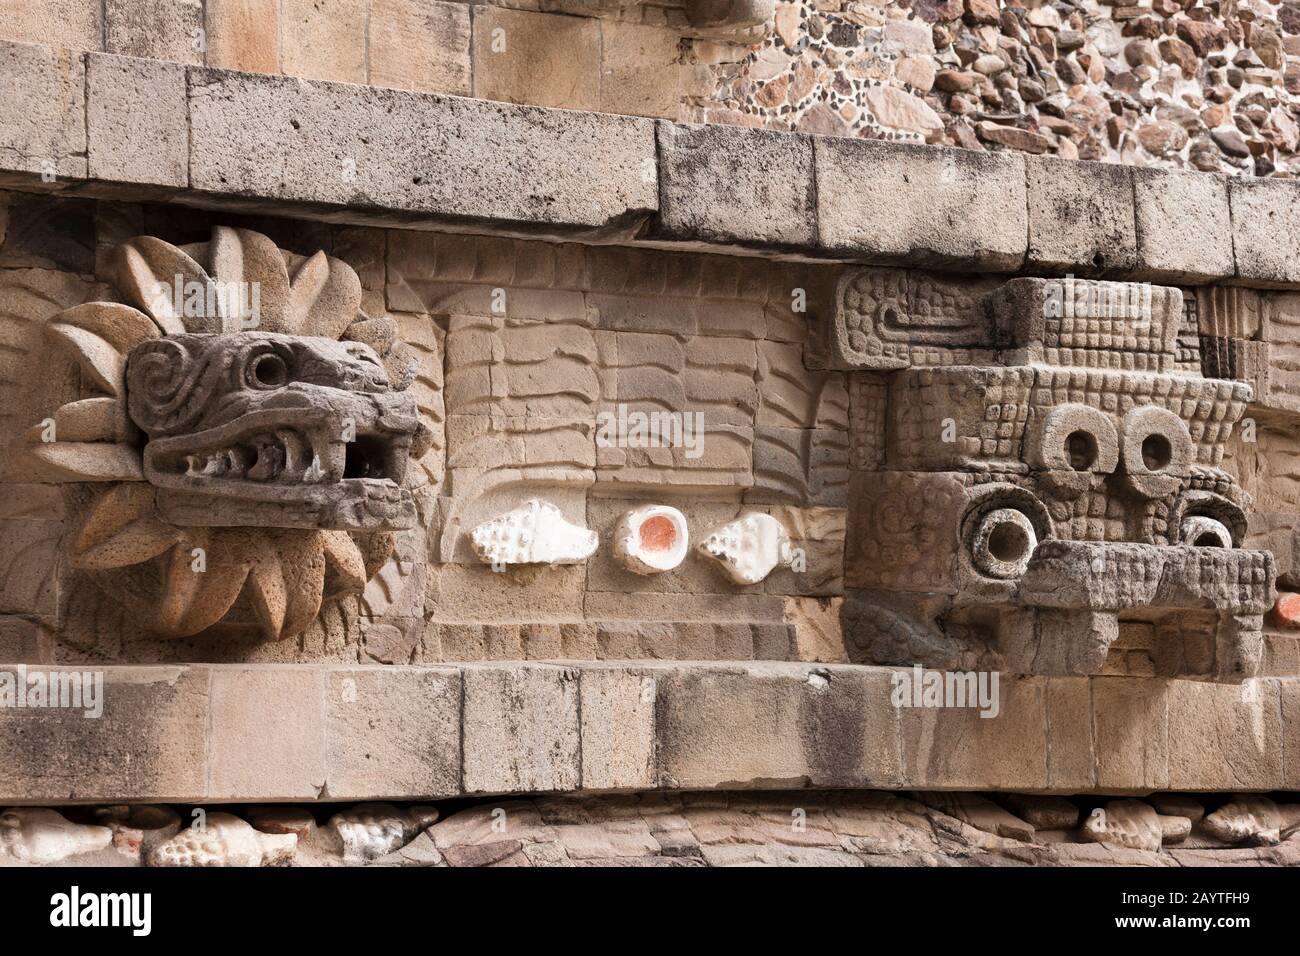 Serpent and Tlaloc head of The temple of Quetzalcoatl, Teotihuacan, suburb of Mexico City, Mexico, Central America Stock Photo